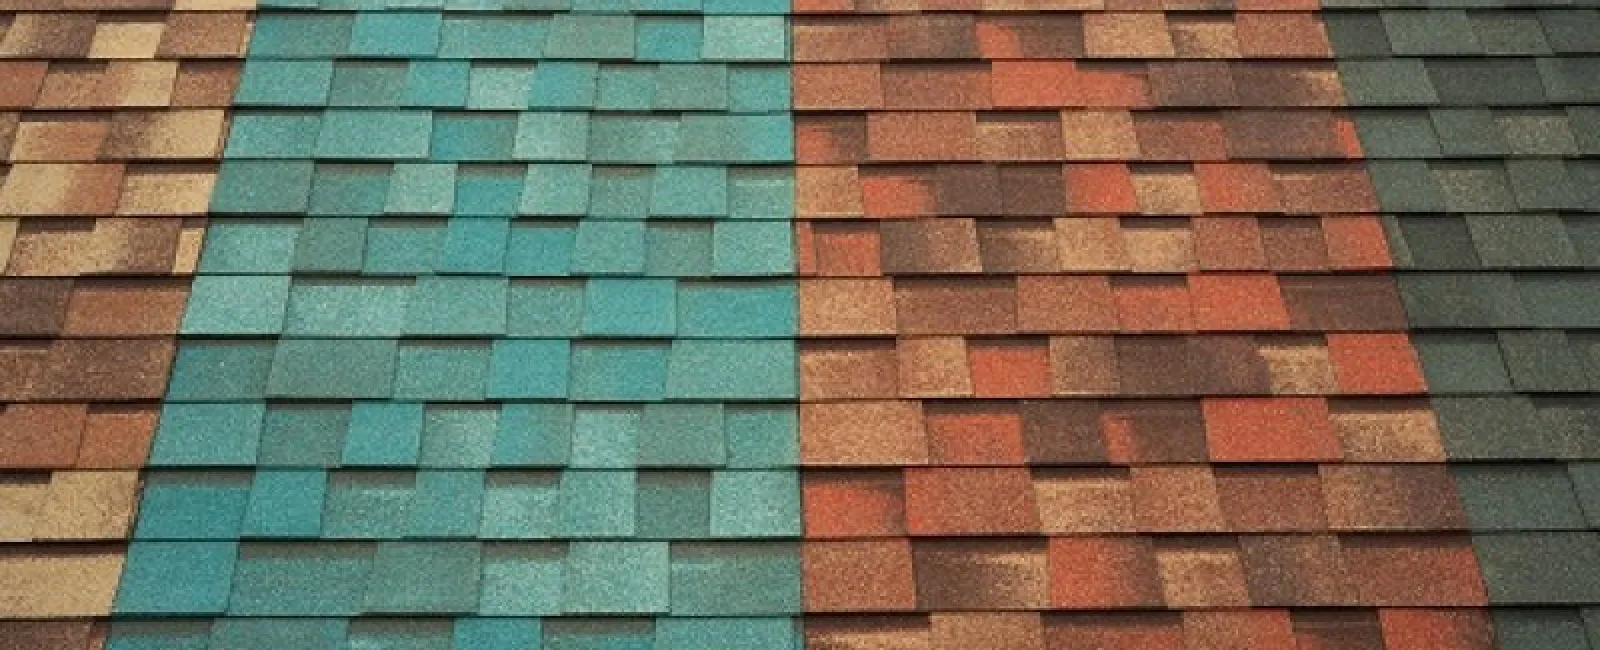 5 Best Ways to Pick a Shingle Color